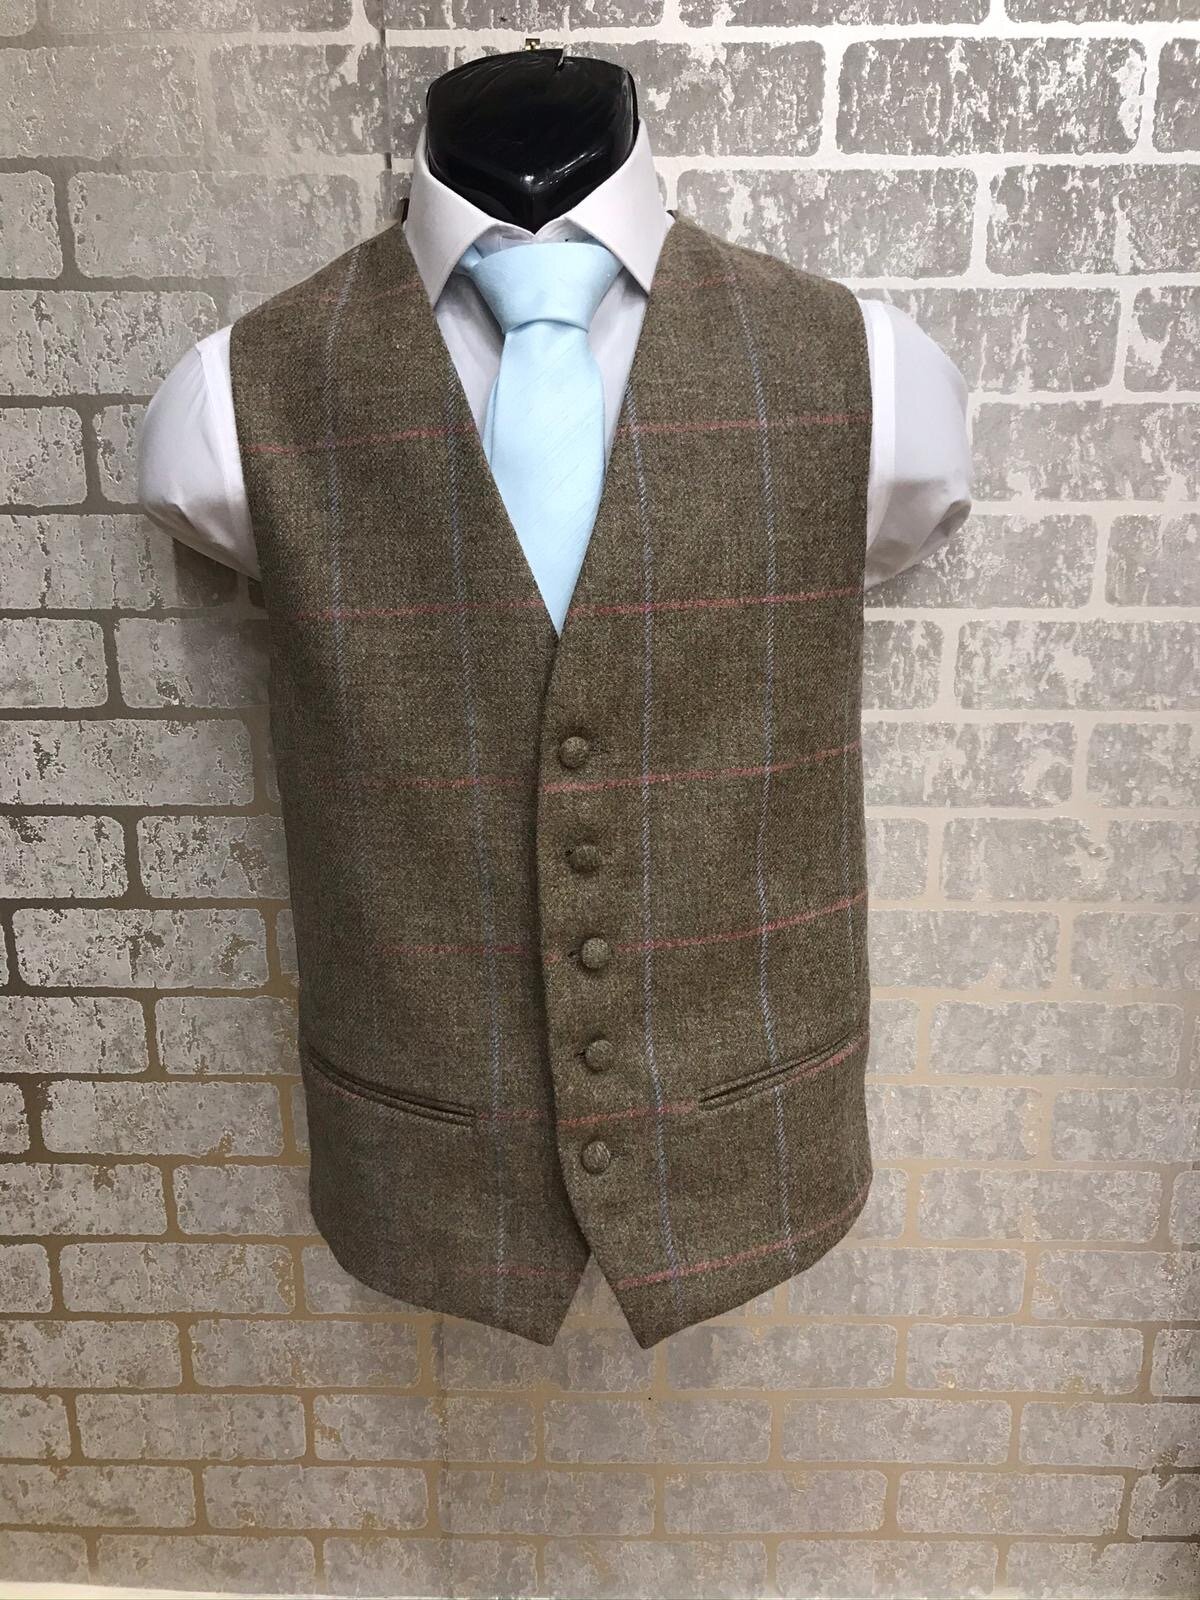 Vintage Tweed Suits To Hire For Wedding, Prom, Derby, Derbyshire — Jon ...